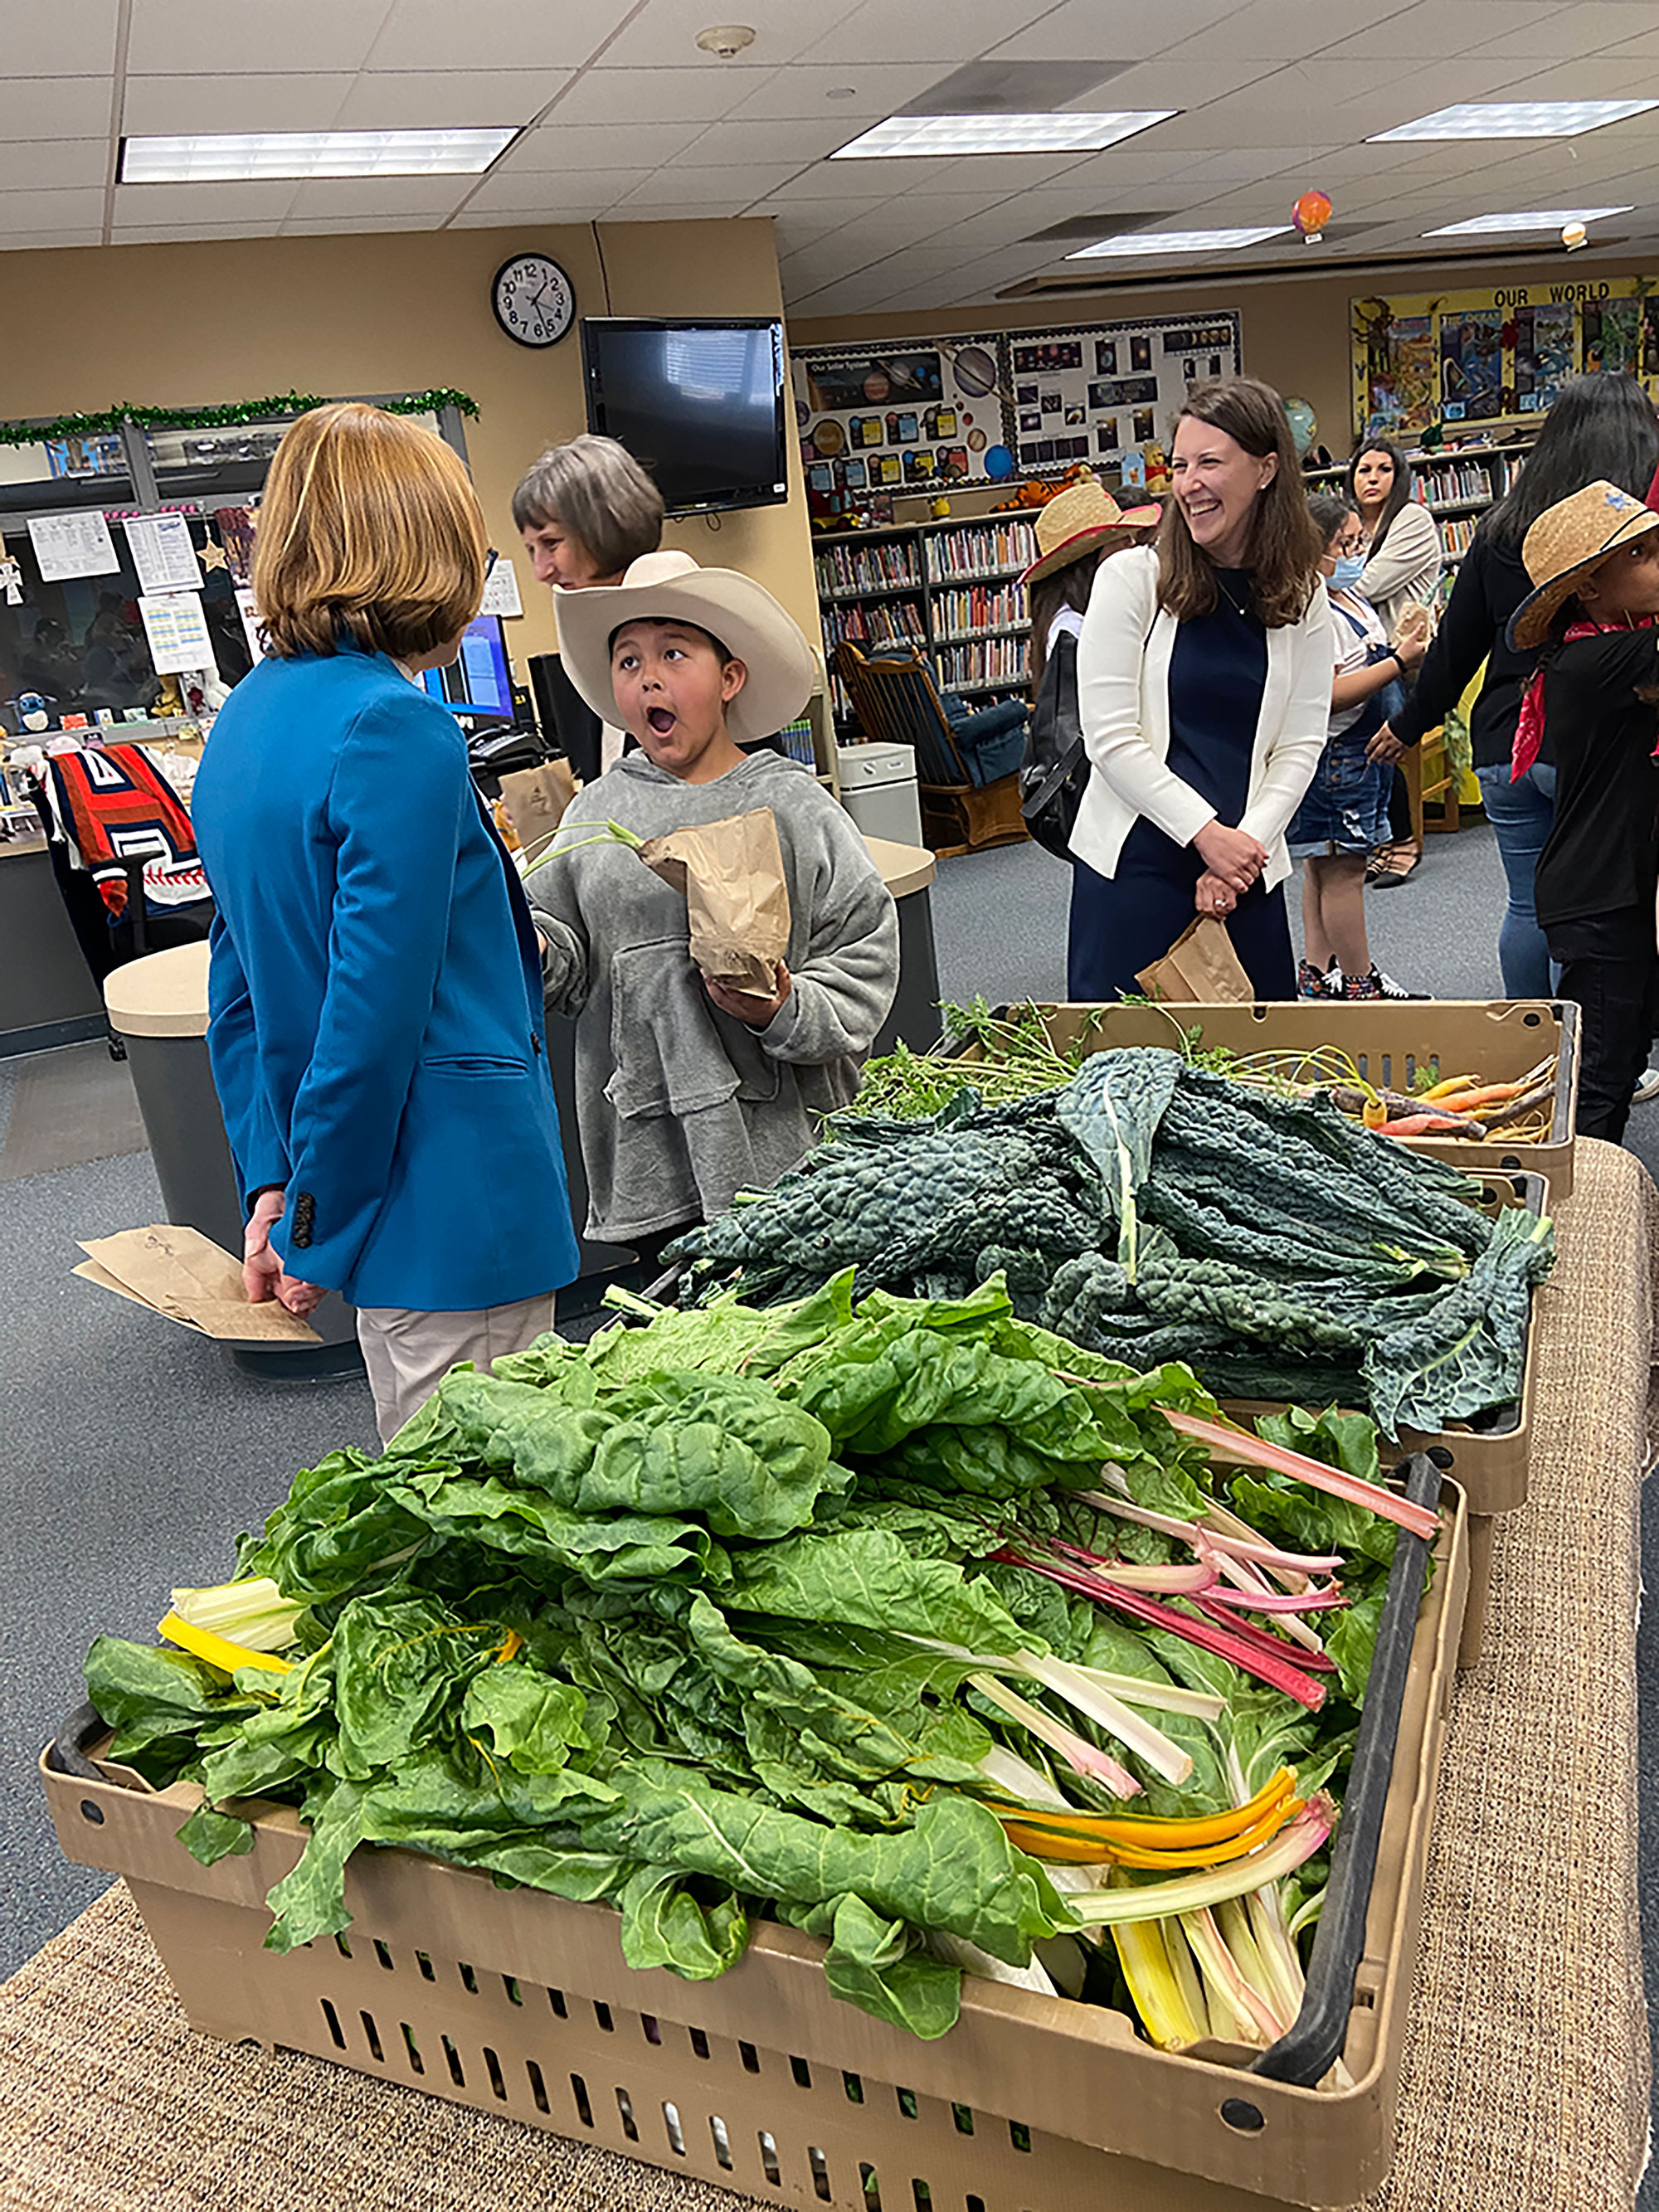 FNS Administrator Cindy Long speaks with a surprised Werner Elementary School student wearing a wide-brimmed hat standing next to boxes of vegetables inside a school library